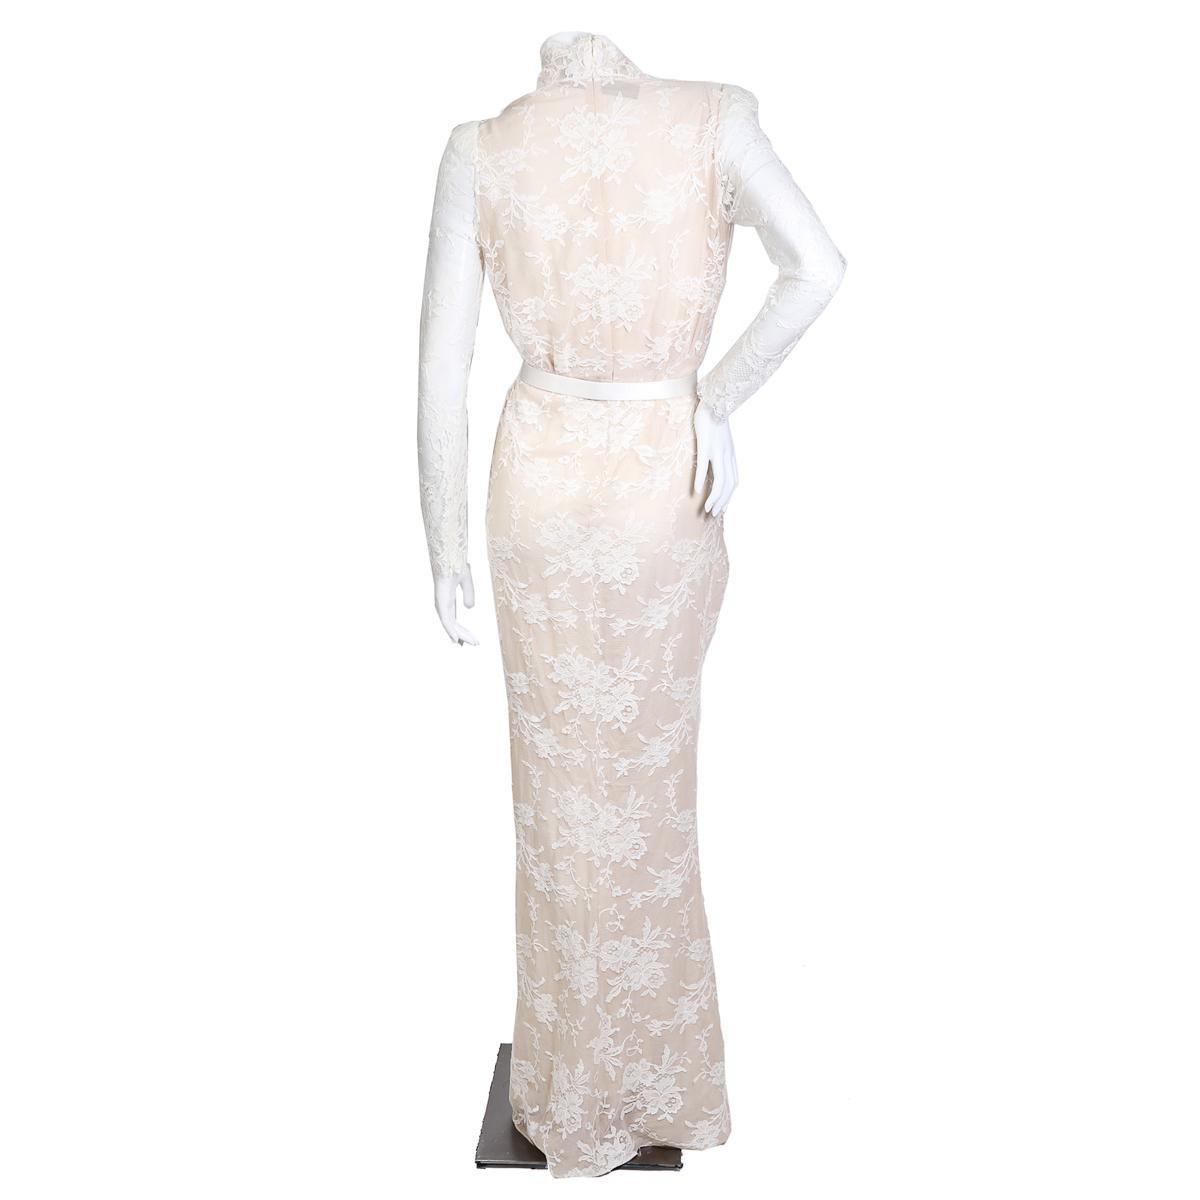 Gown from Alexander McQueen
White lace with nude lining
Long sleeves
Includes white satin belt with a rainbow jewel sun emblem
Back zipper closure and zipper cuffs
Condition: Excellent
Size/Measurements:
Size 42
15